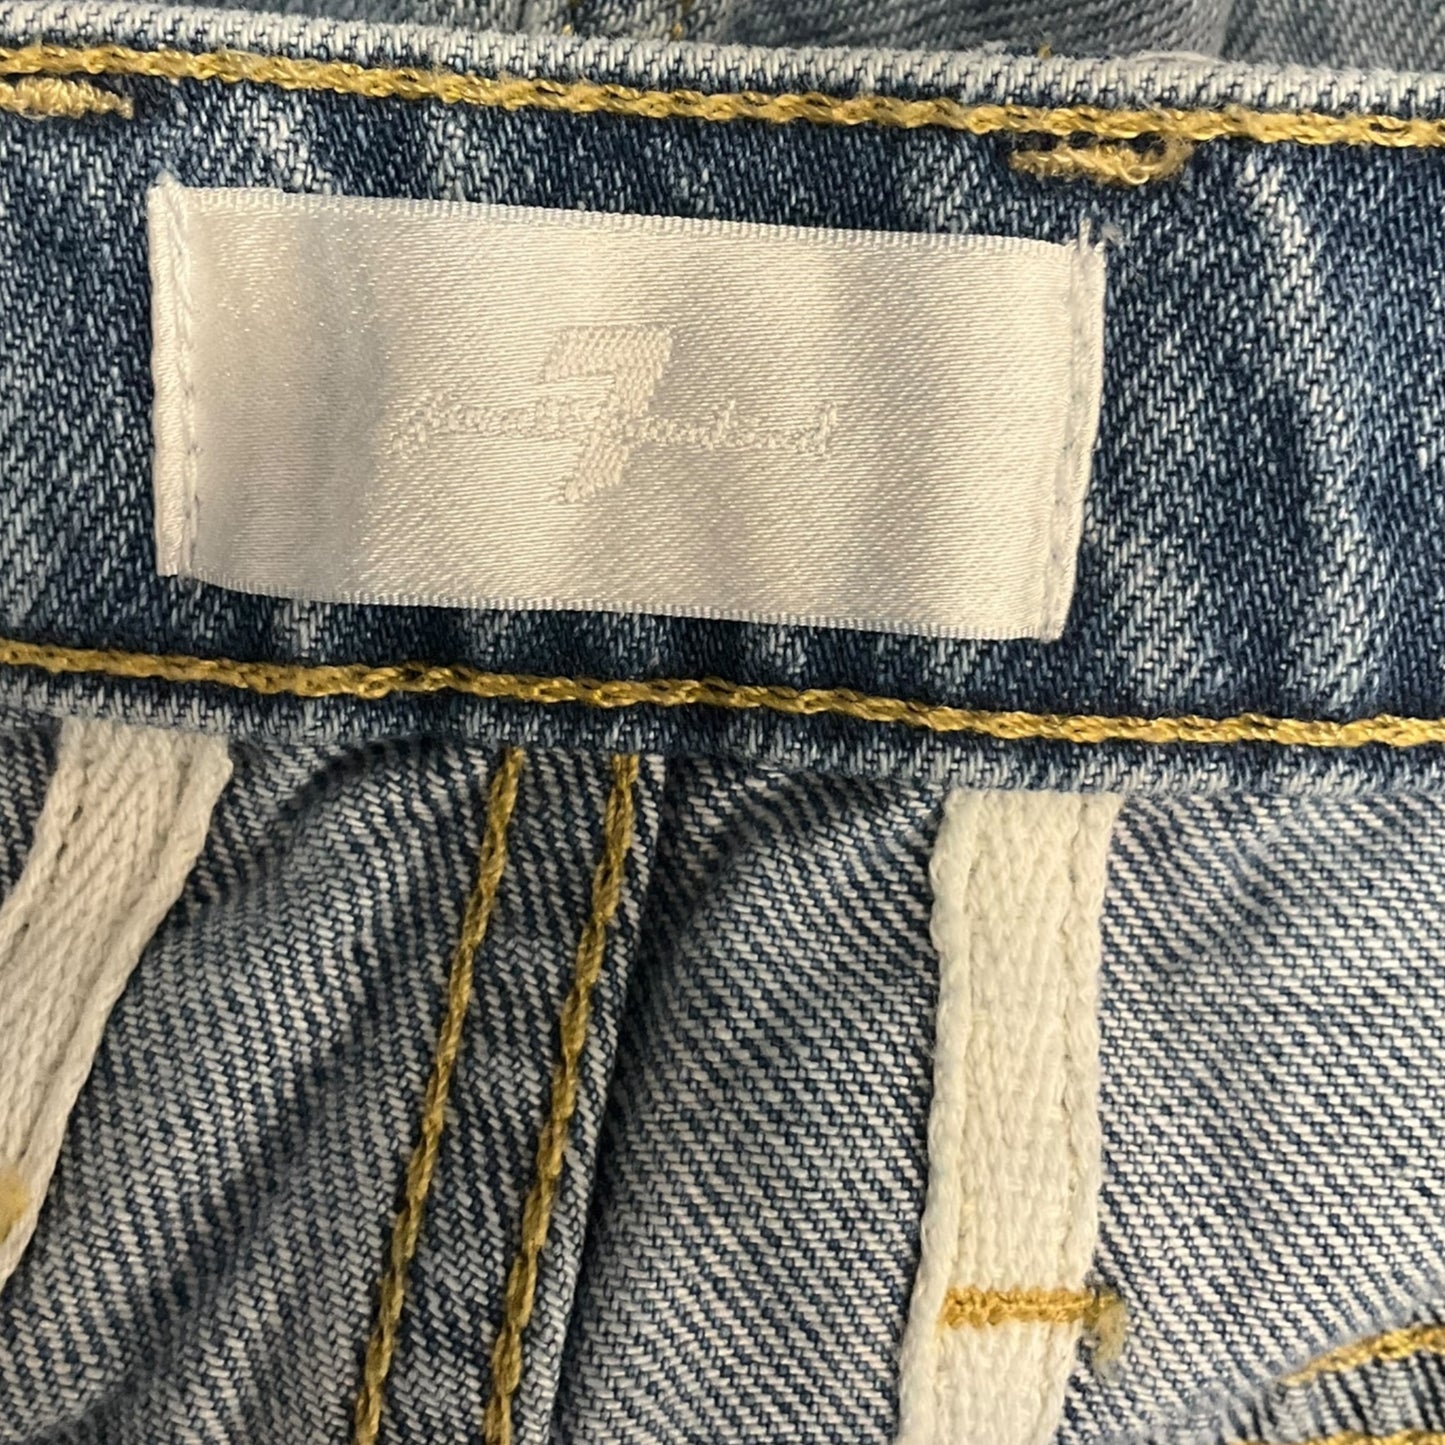 Jeans Straight By 7 For All Mankind  Size: 14